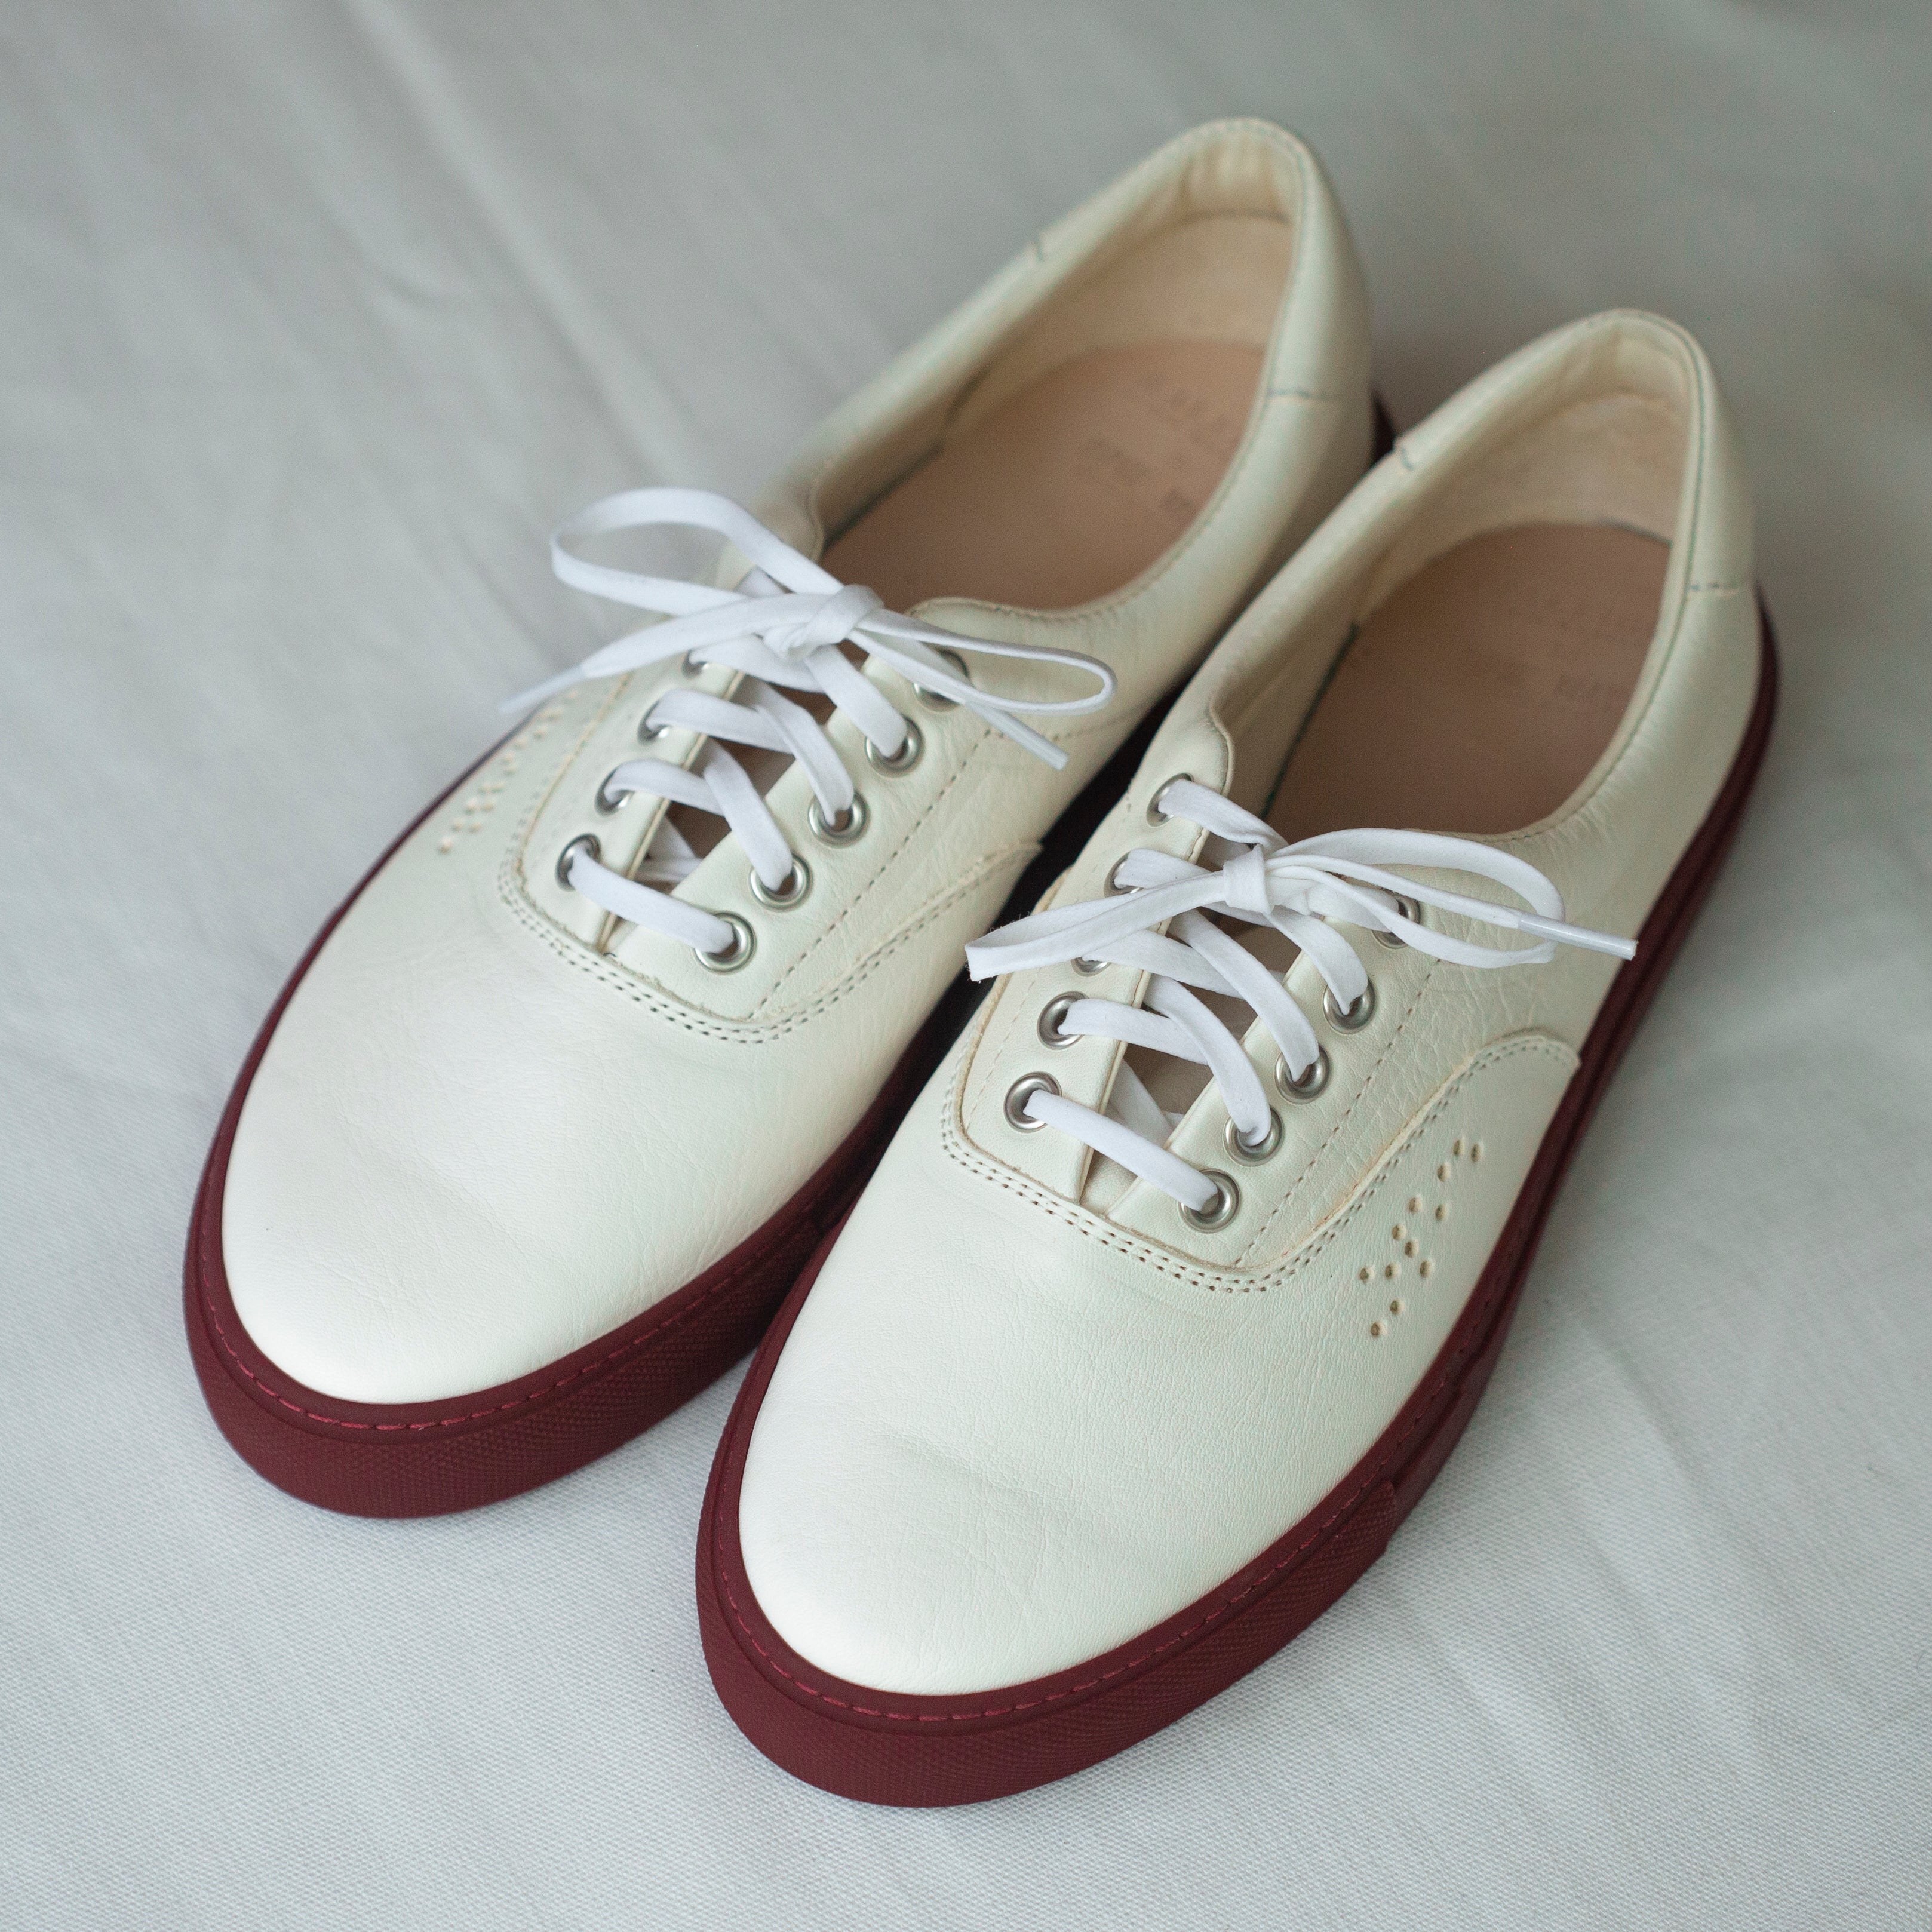 Opie Way x Raleigh Denim Shoes | White Leather